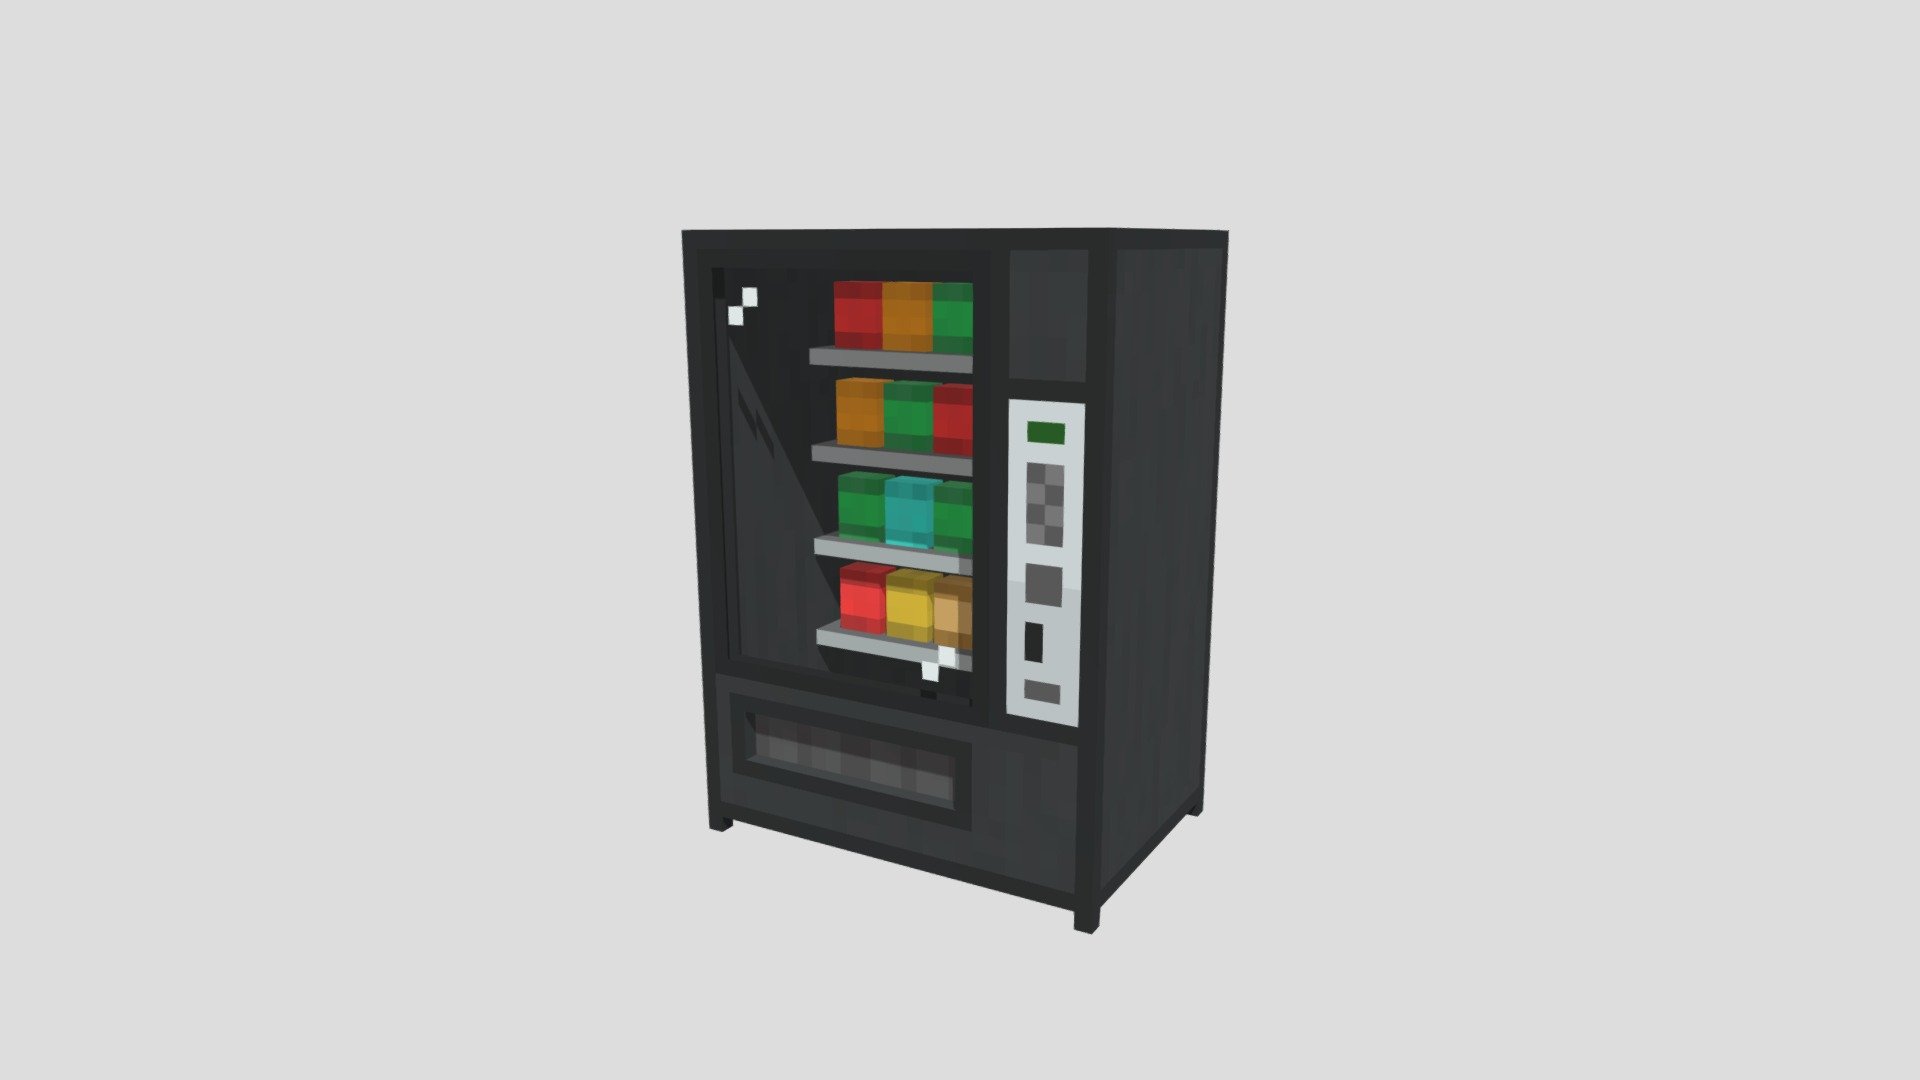 I created this model with Blockbench and Paint 3D for the textures, for use in a Minecraft map. Players can interact with the vending machine to purchase food items and drinks with Dino-coins 3d model